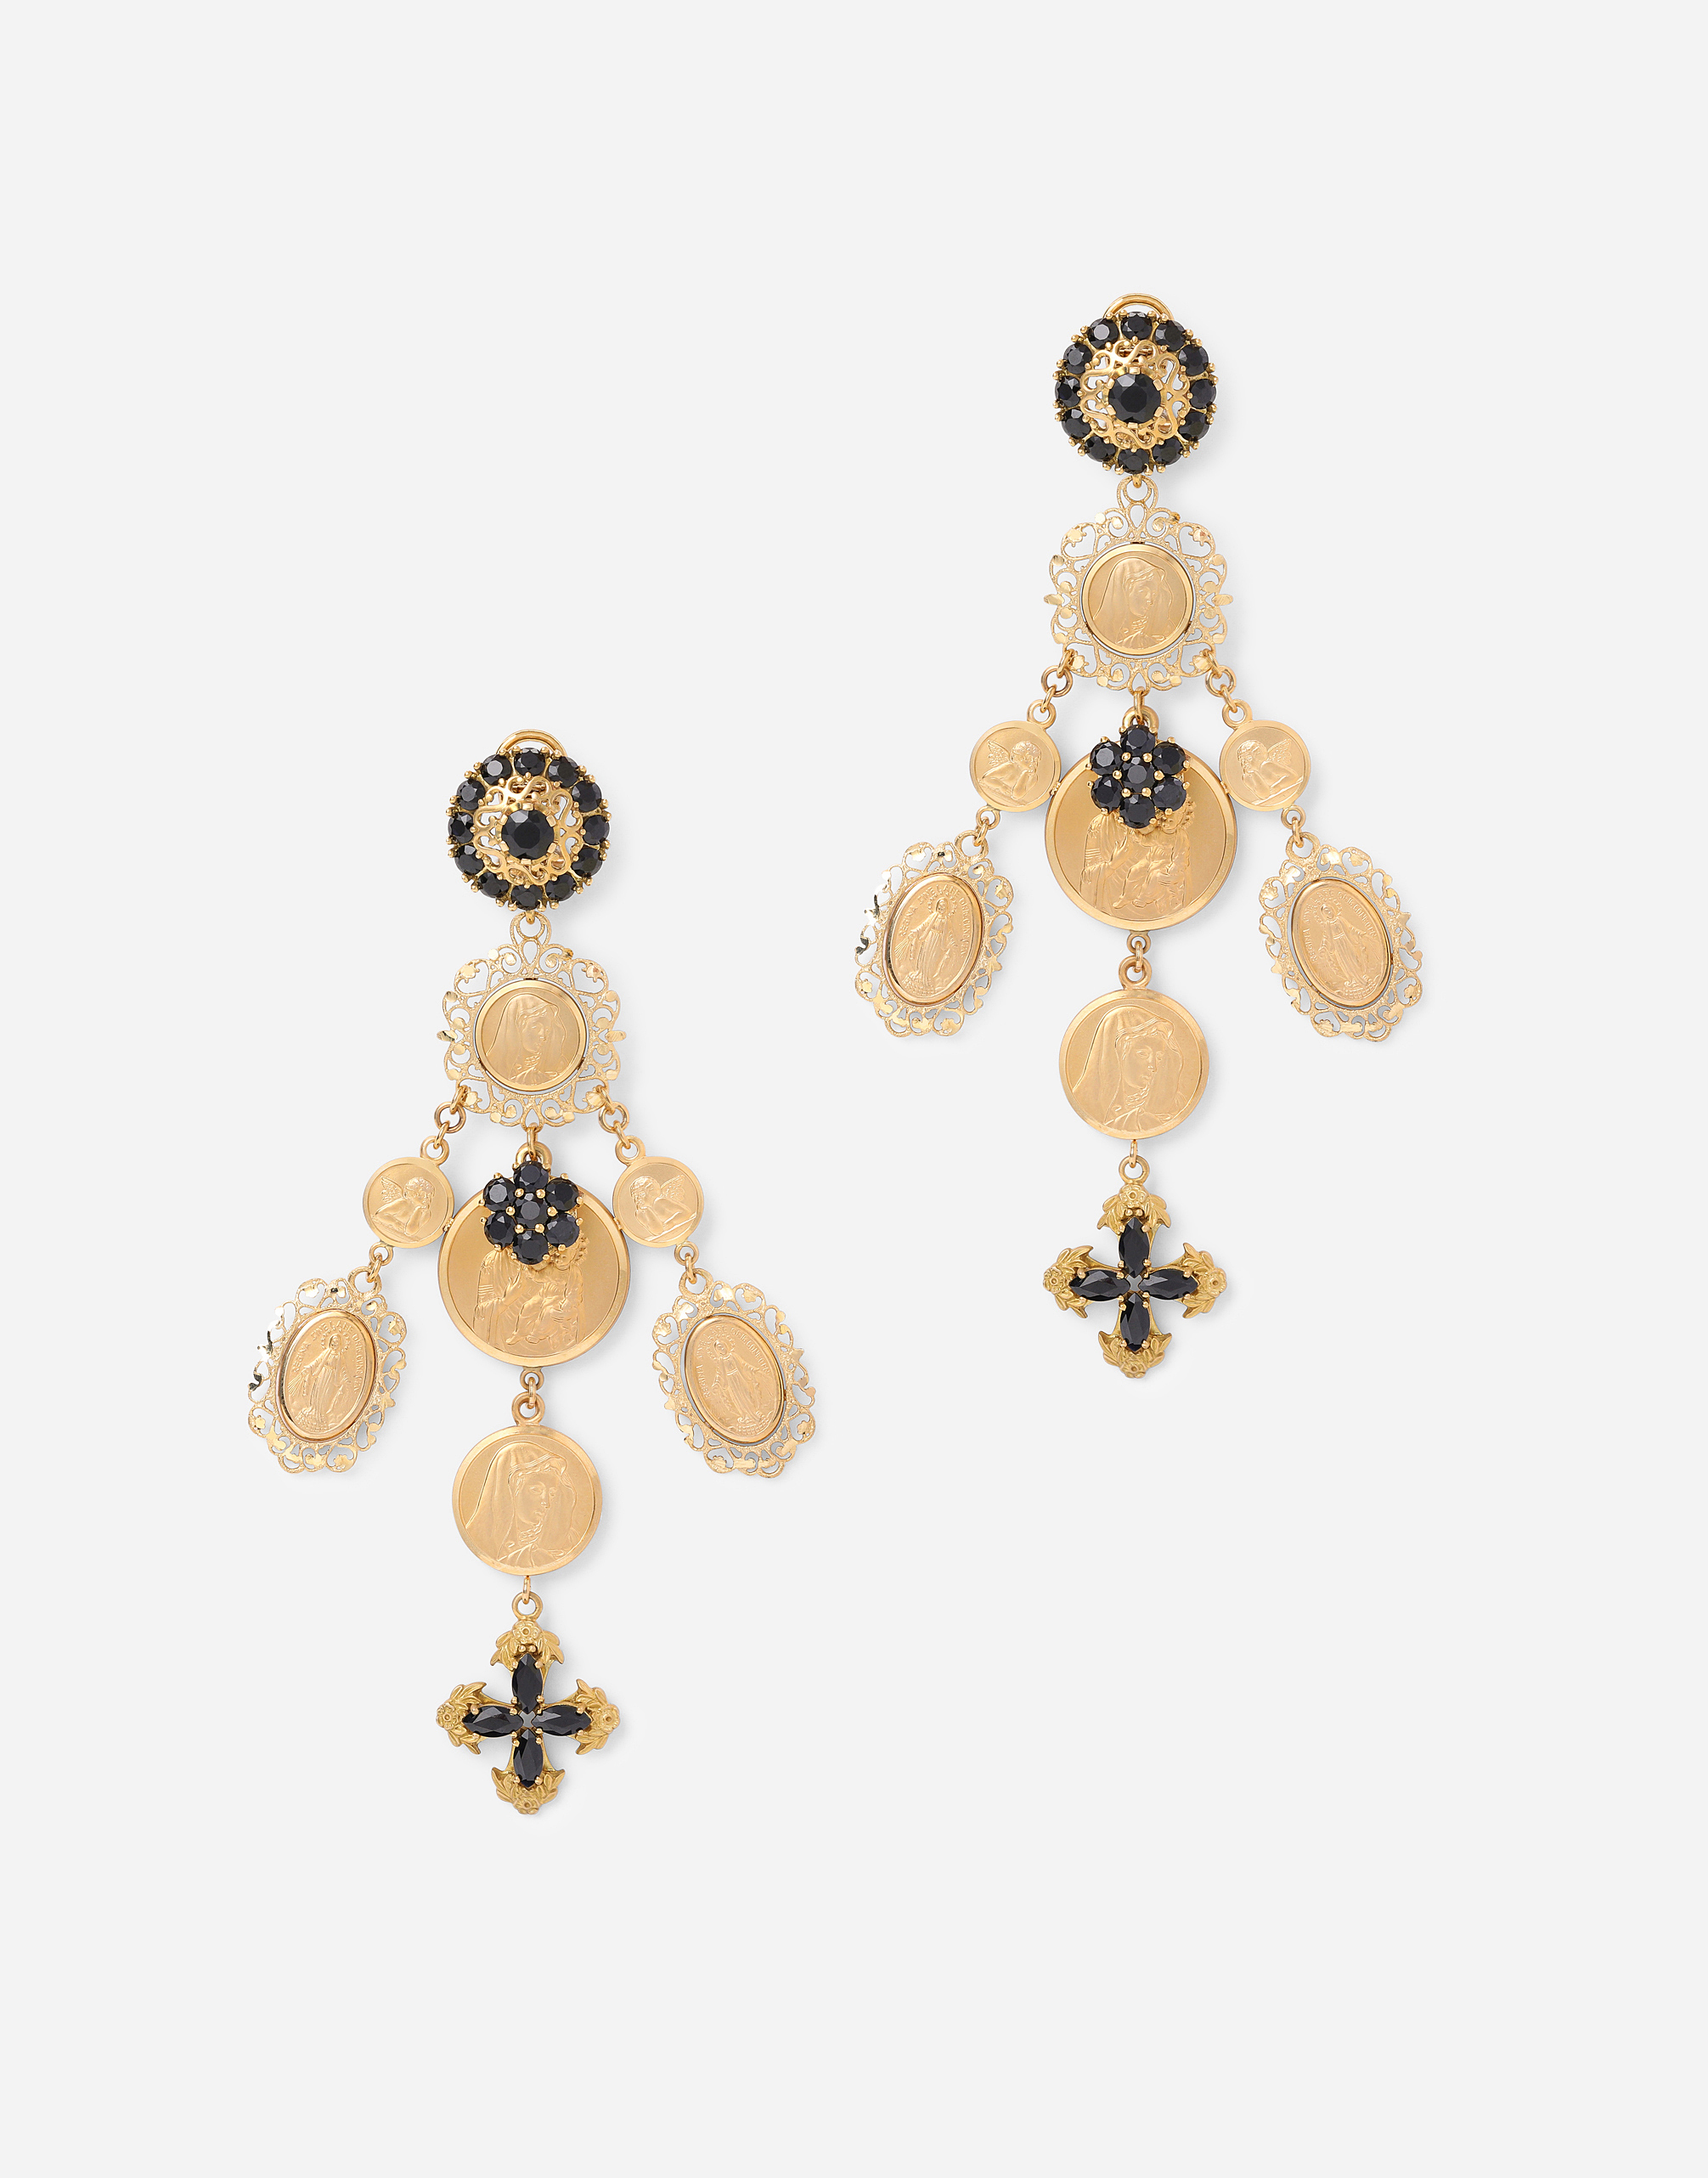 Sicily earrings in yellow 18kt gold with medals in Gold